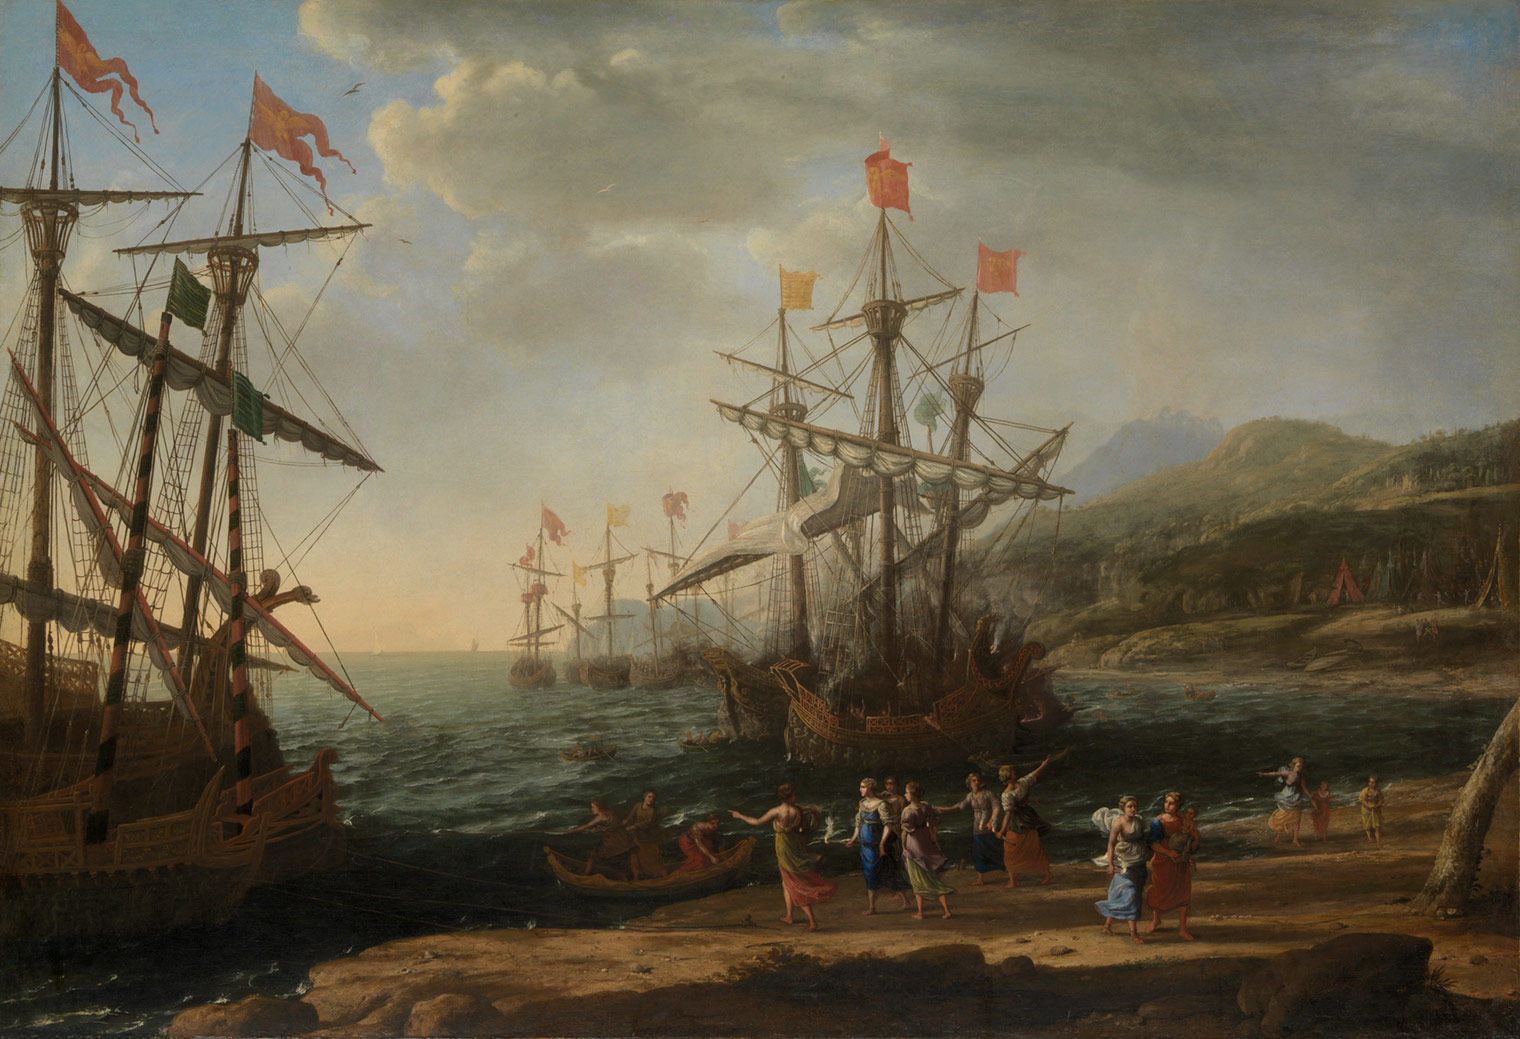 A painting by Claude Lorrain of The Trojan Women Setting Fire to Their Fleet